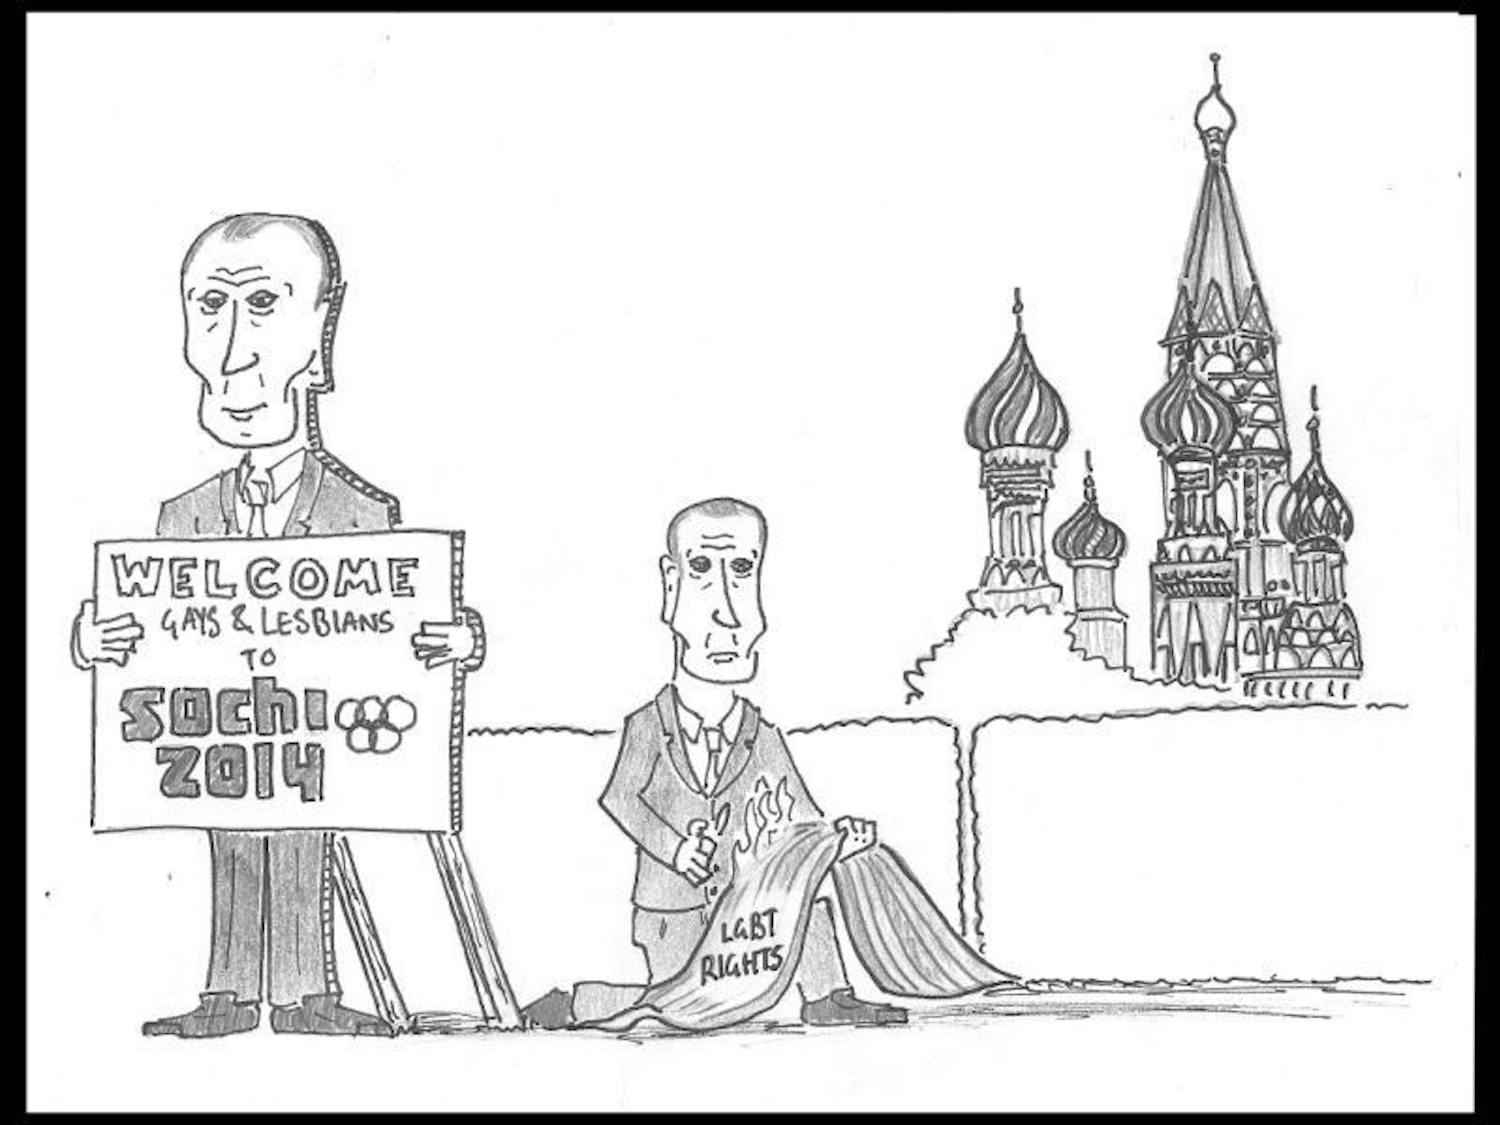 Putin, homosexuality and the 2014 Winter Olympics